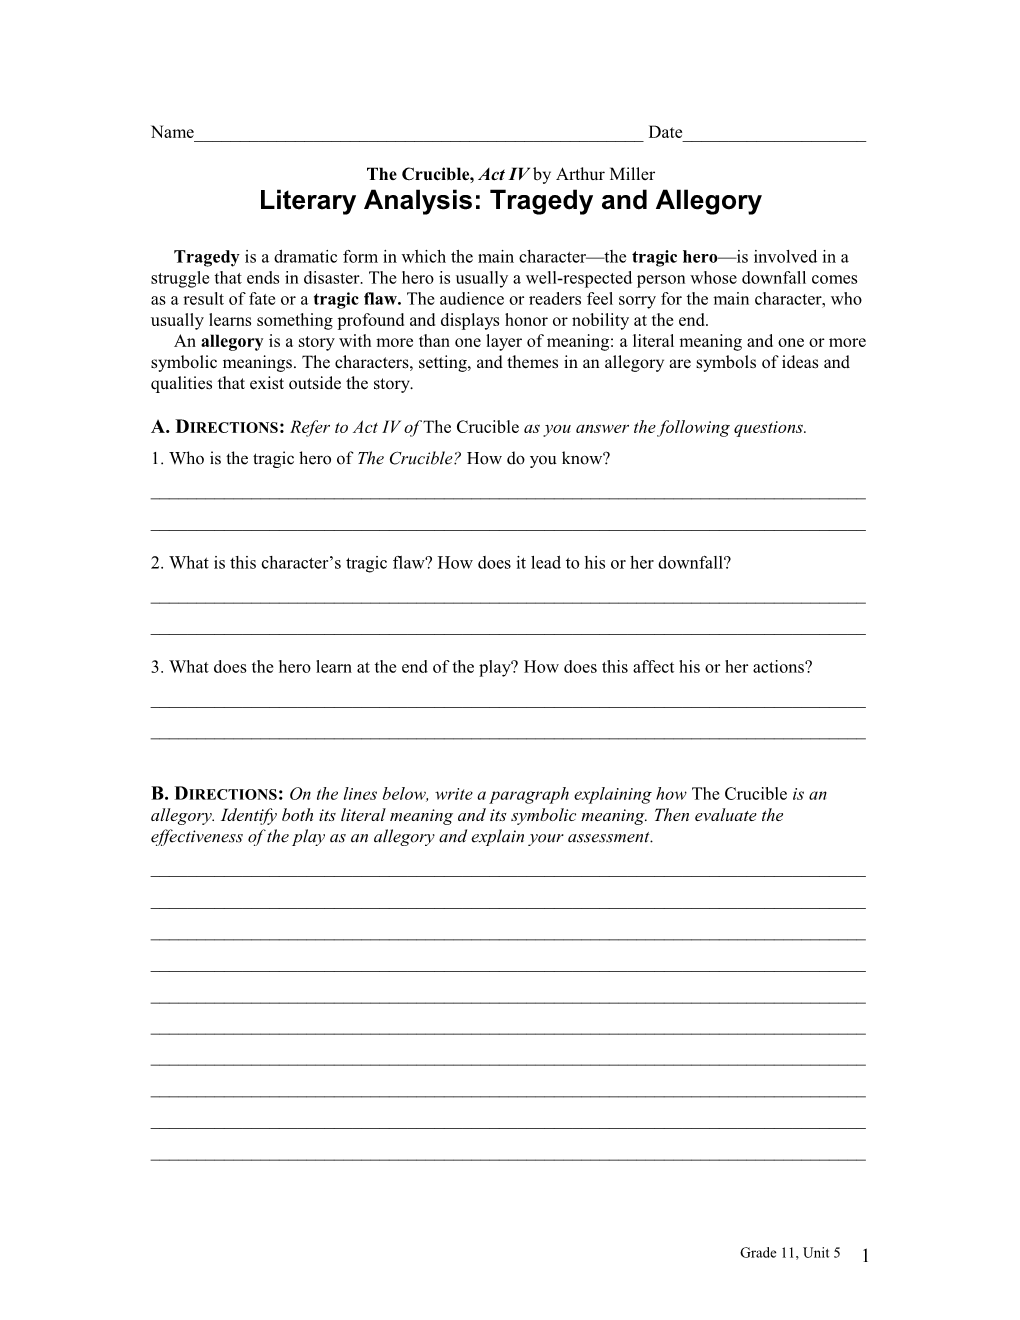 Literary Analysis: Tragedy and Allegory